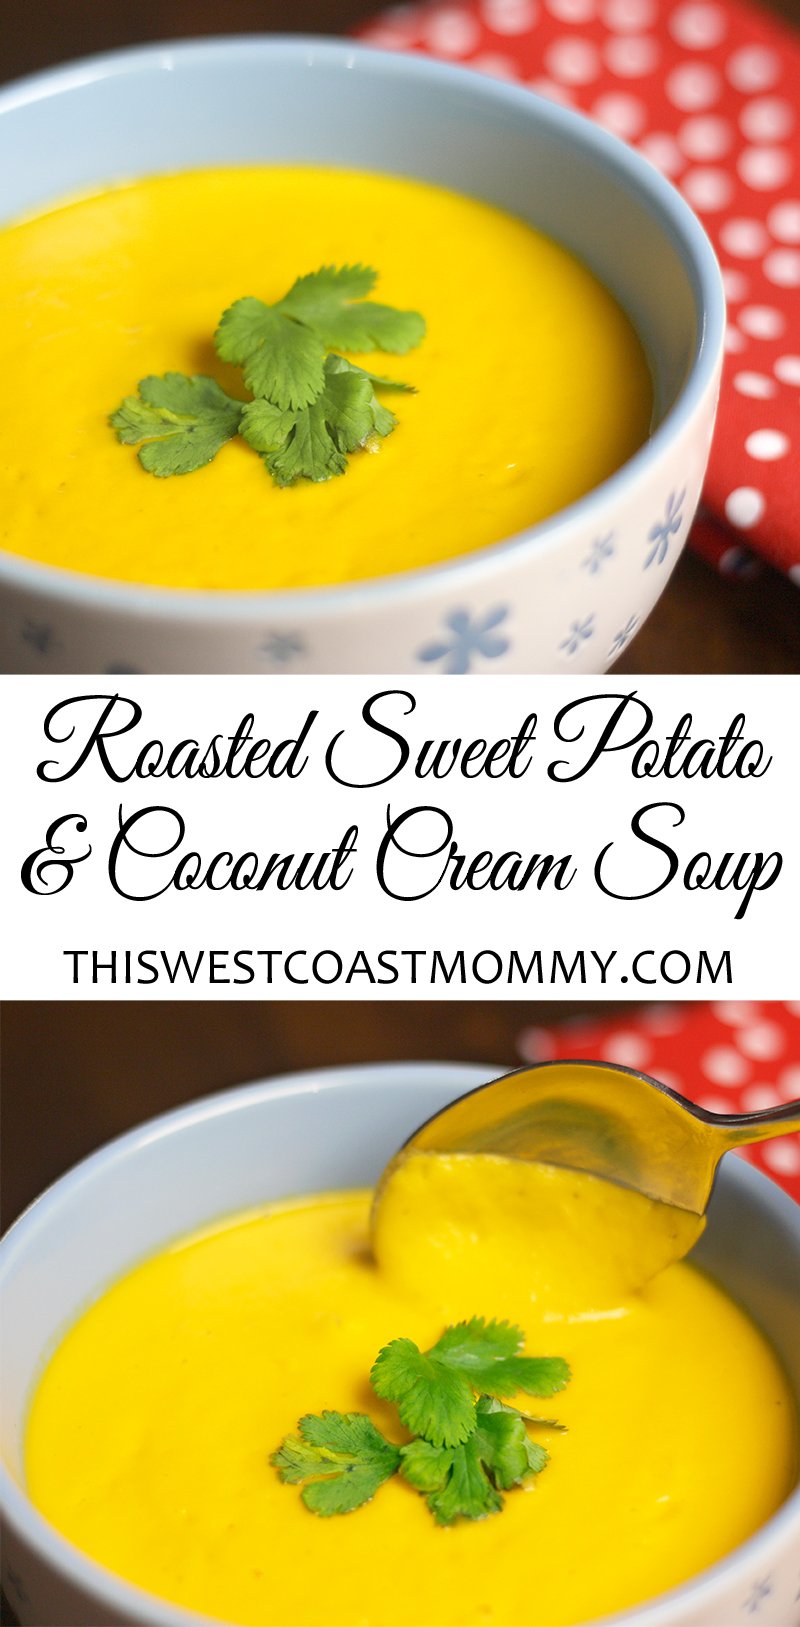 This roasted sweet potato and coconut cream soup is gluten-free, dairy-free, paleo, and Whole30 friendly.